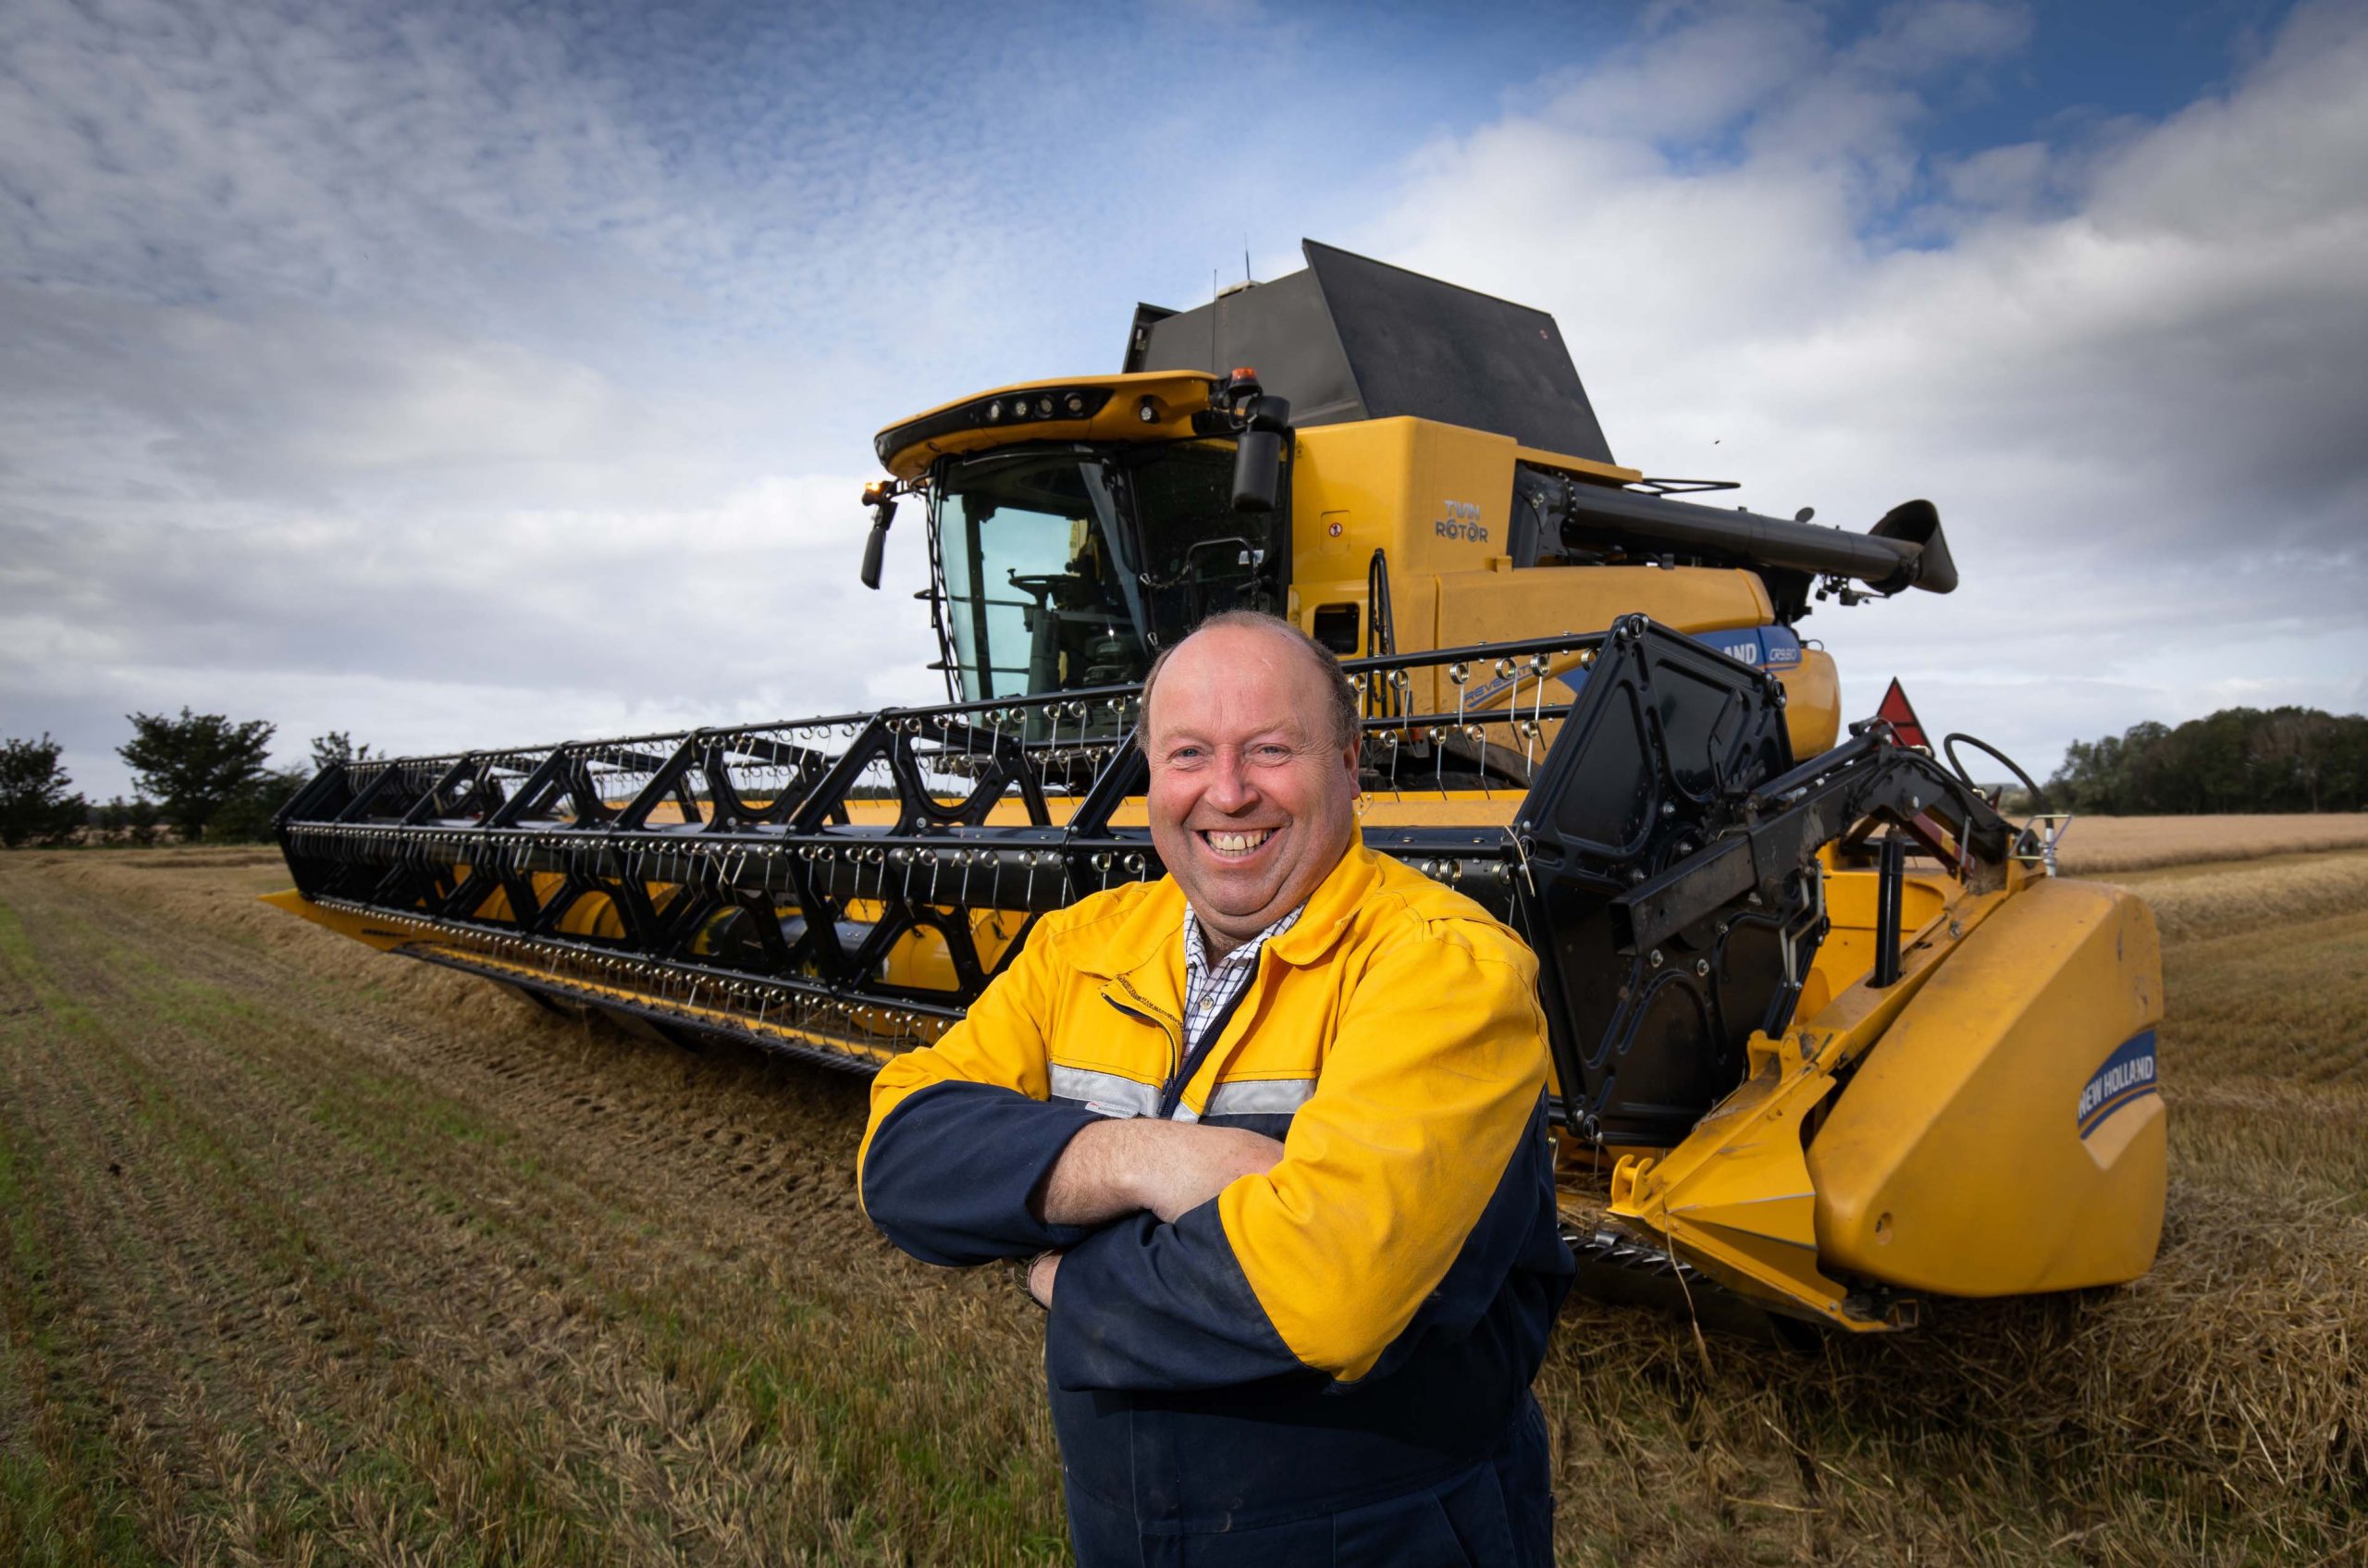 One of Barley Malt farmers in the UK, stands beside hos combine harvester in the field after harvest.